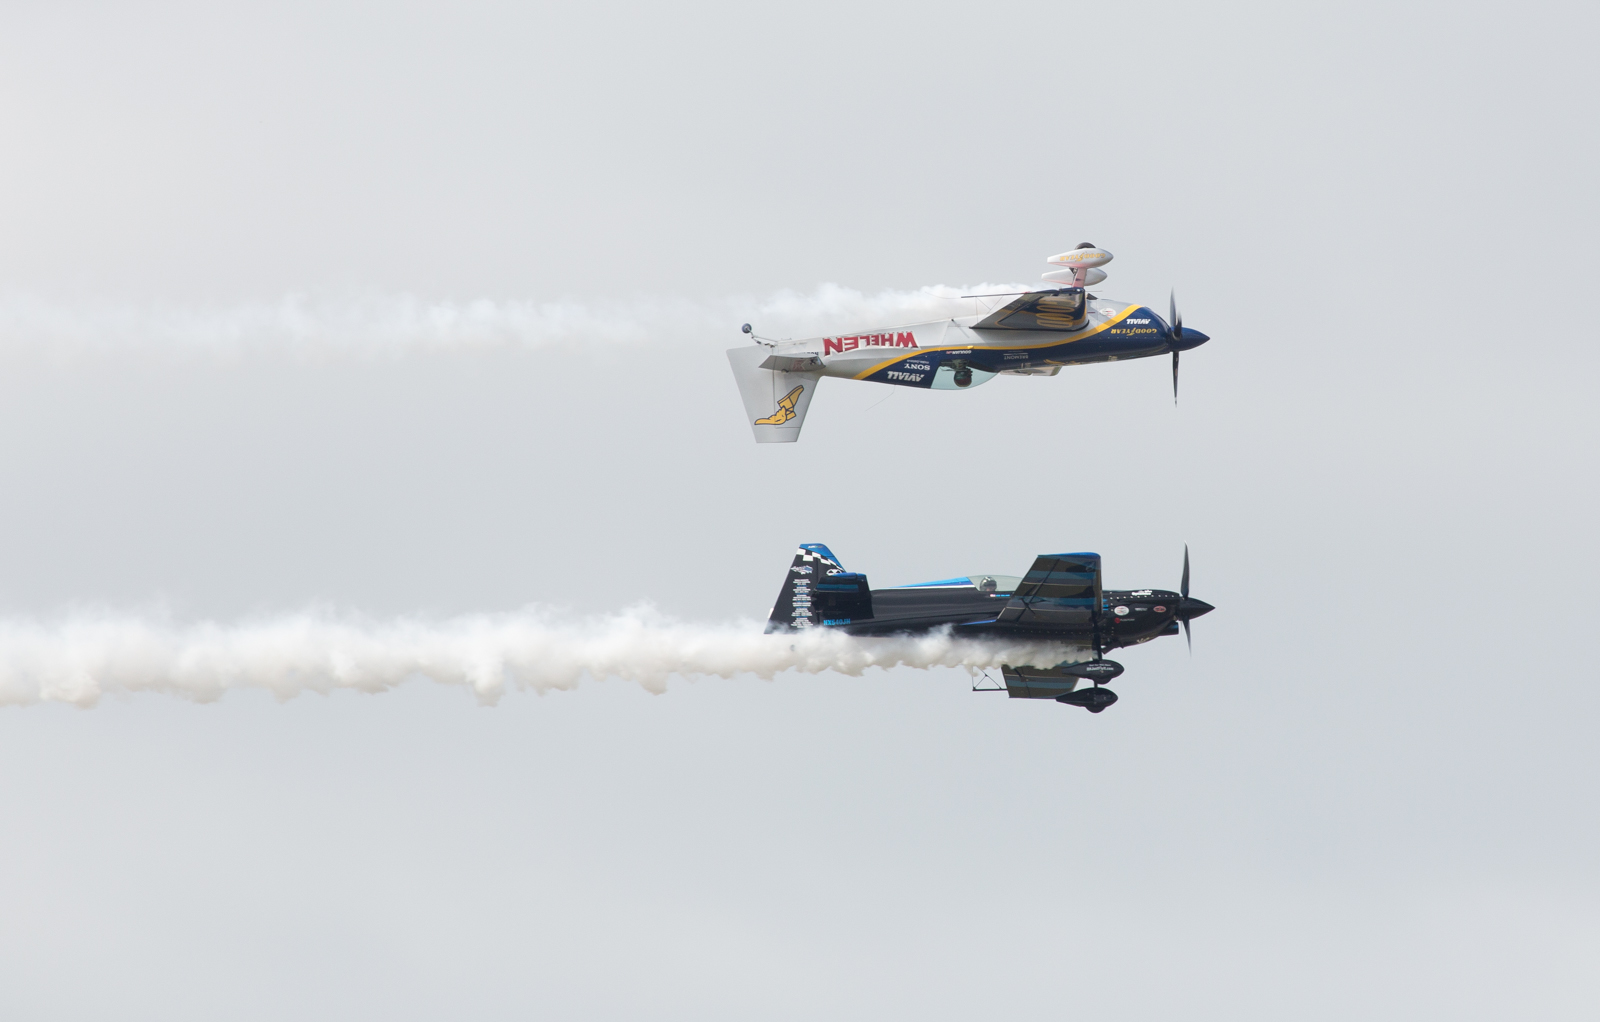 Mike Goulian in an Extra 330SC and Rob Holland in MXS-RHa in a Calypso Pass at Macdill Airfest 2014